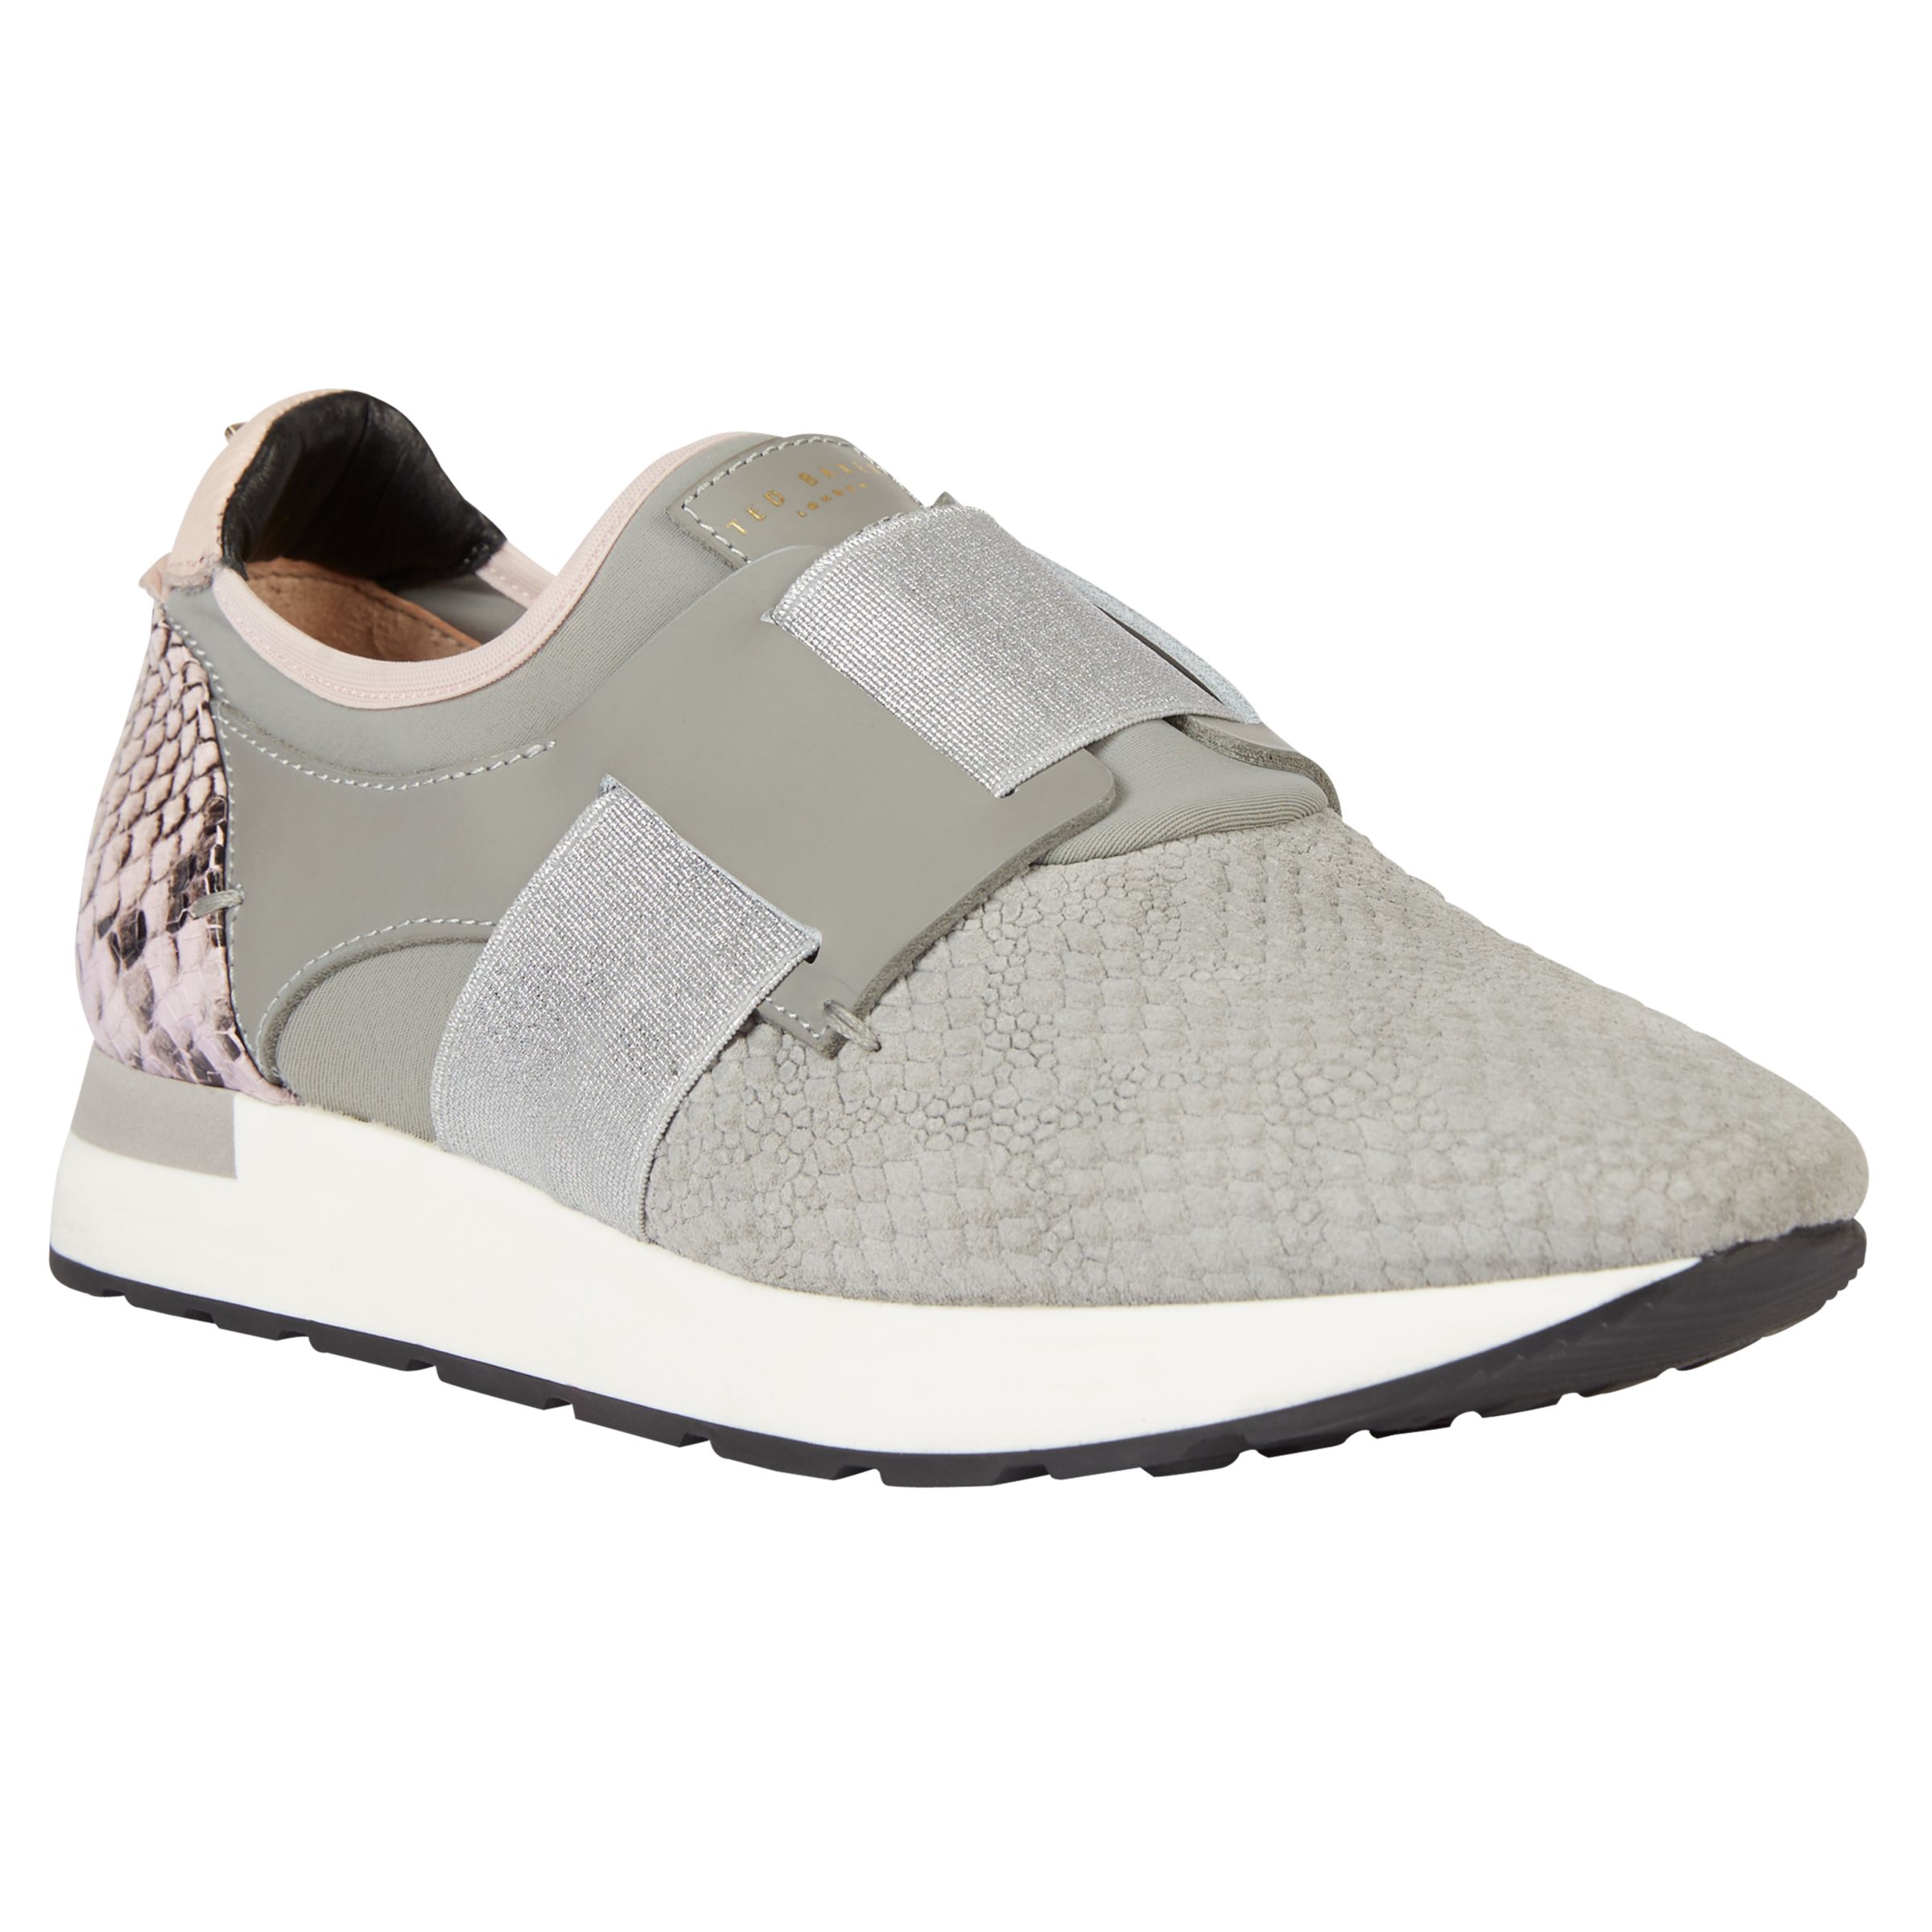 Ted Baker Kygoa Slip On Trainers, Grey/Pink